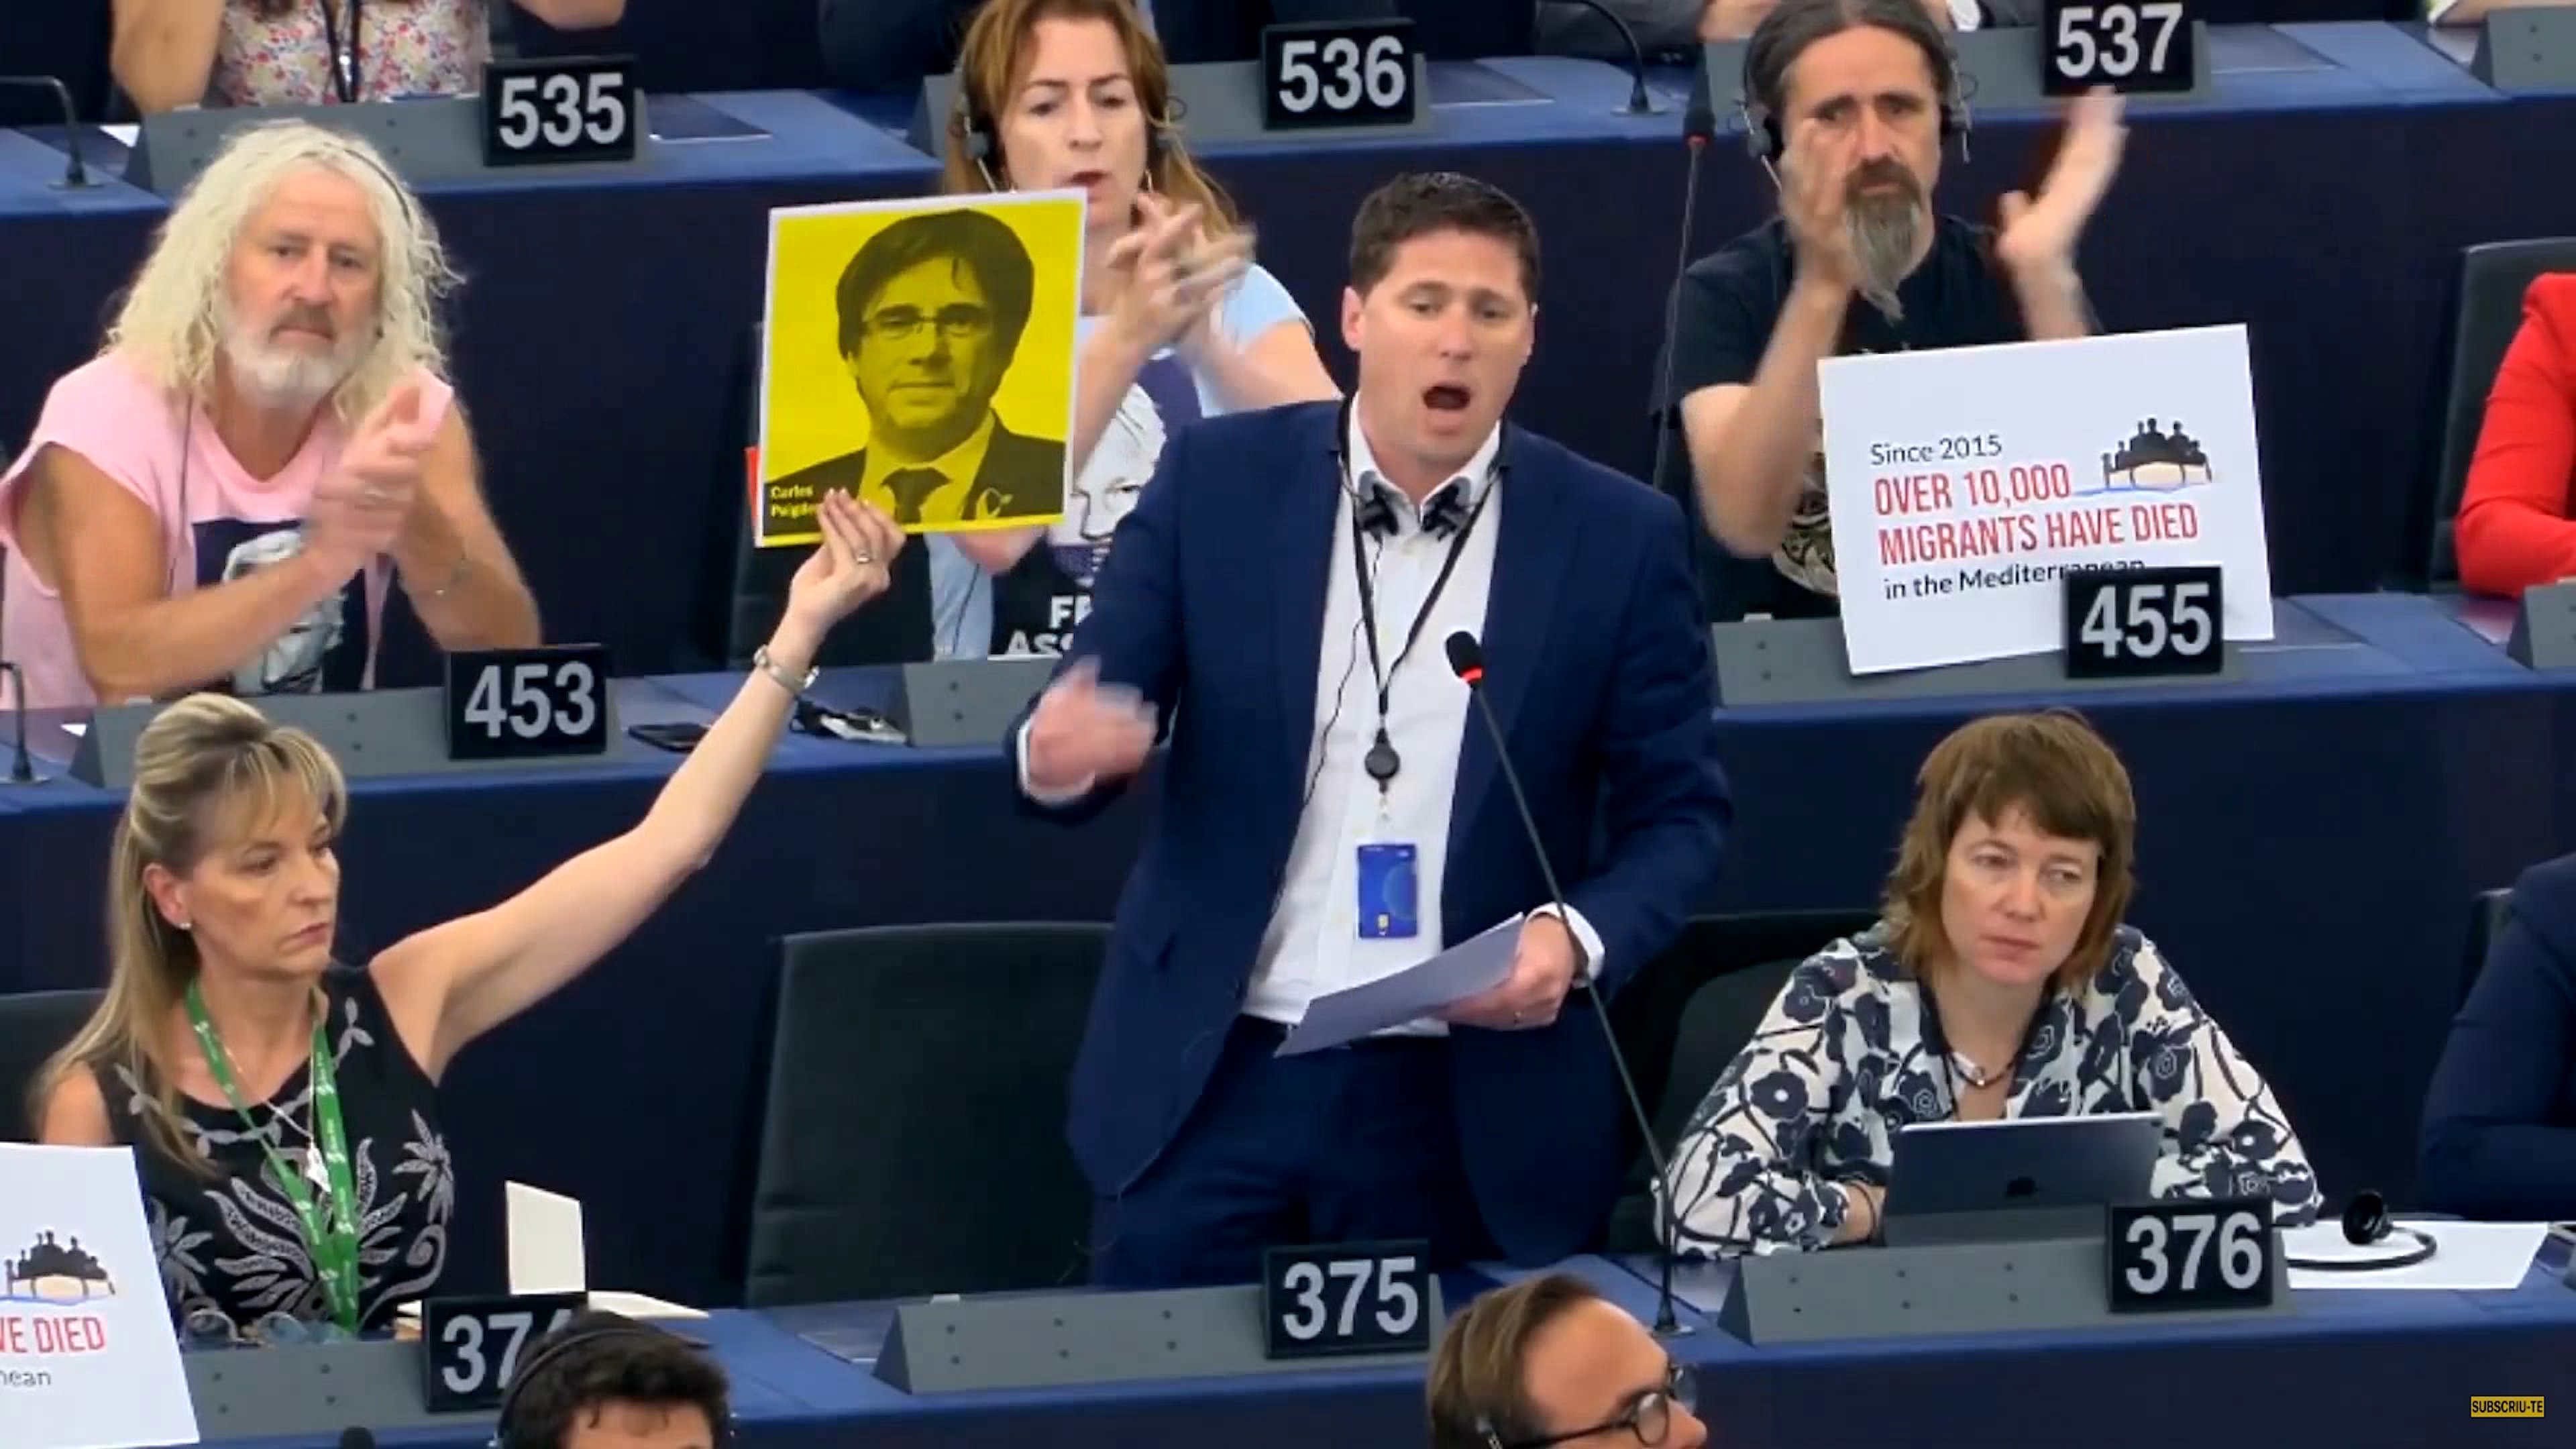 EU Parliament told: "The credibility of this house is at stake" on Catalan MEPs issue